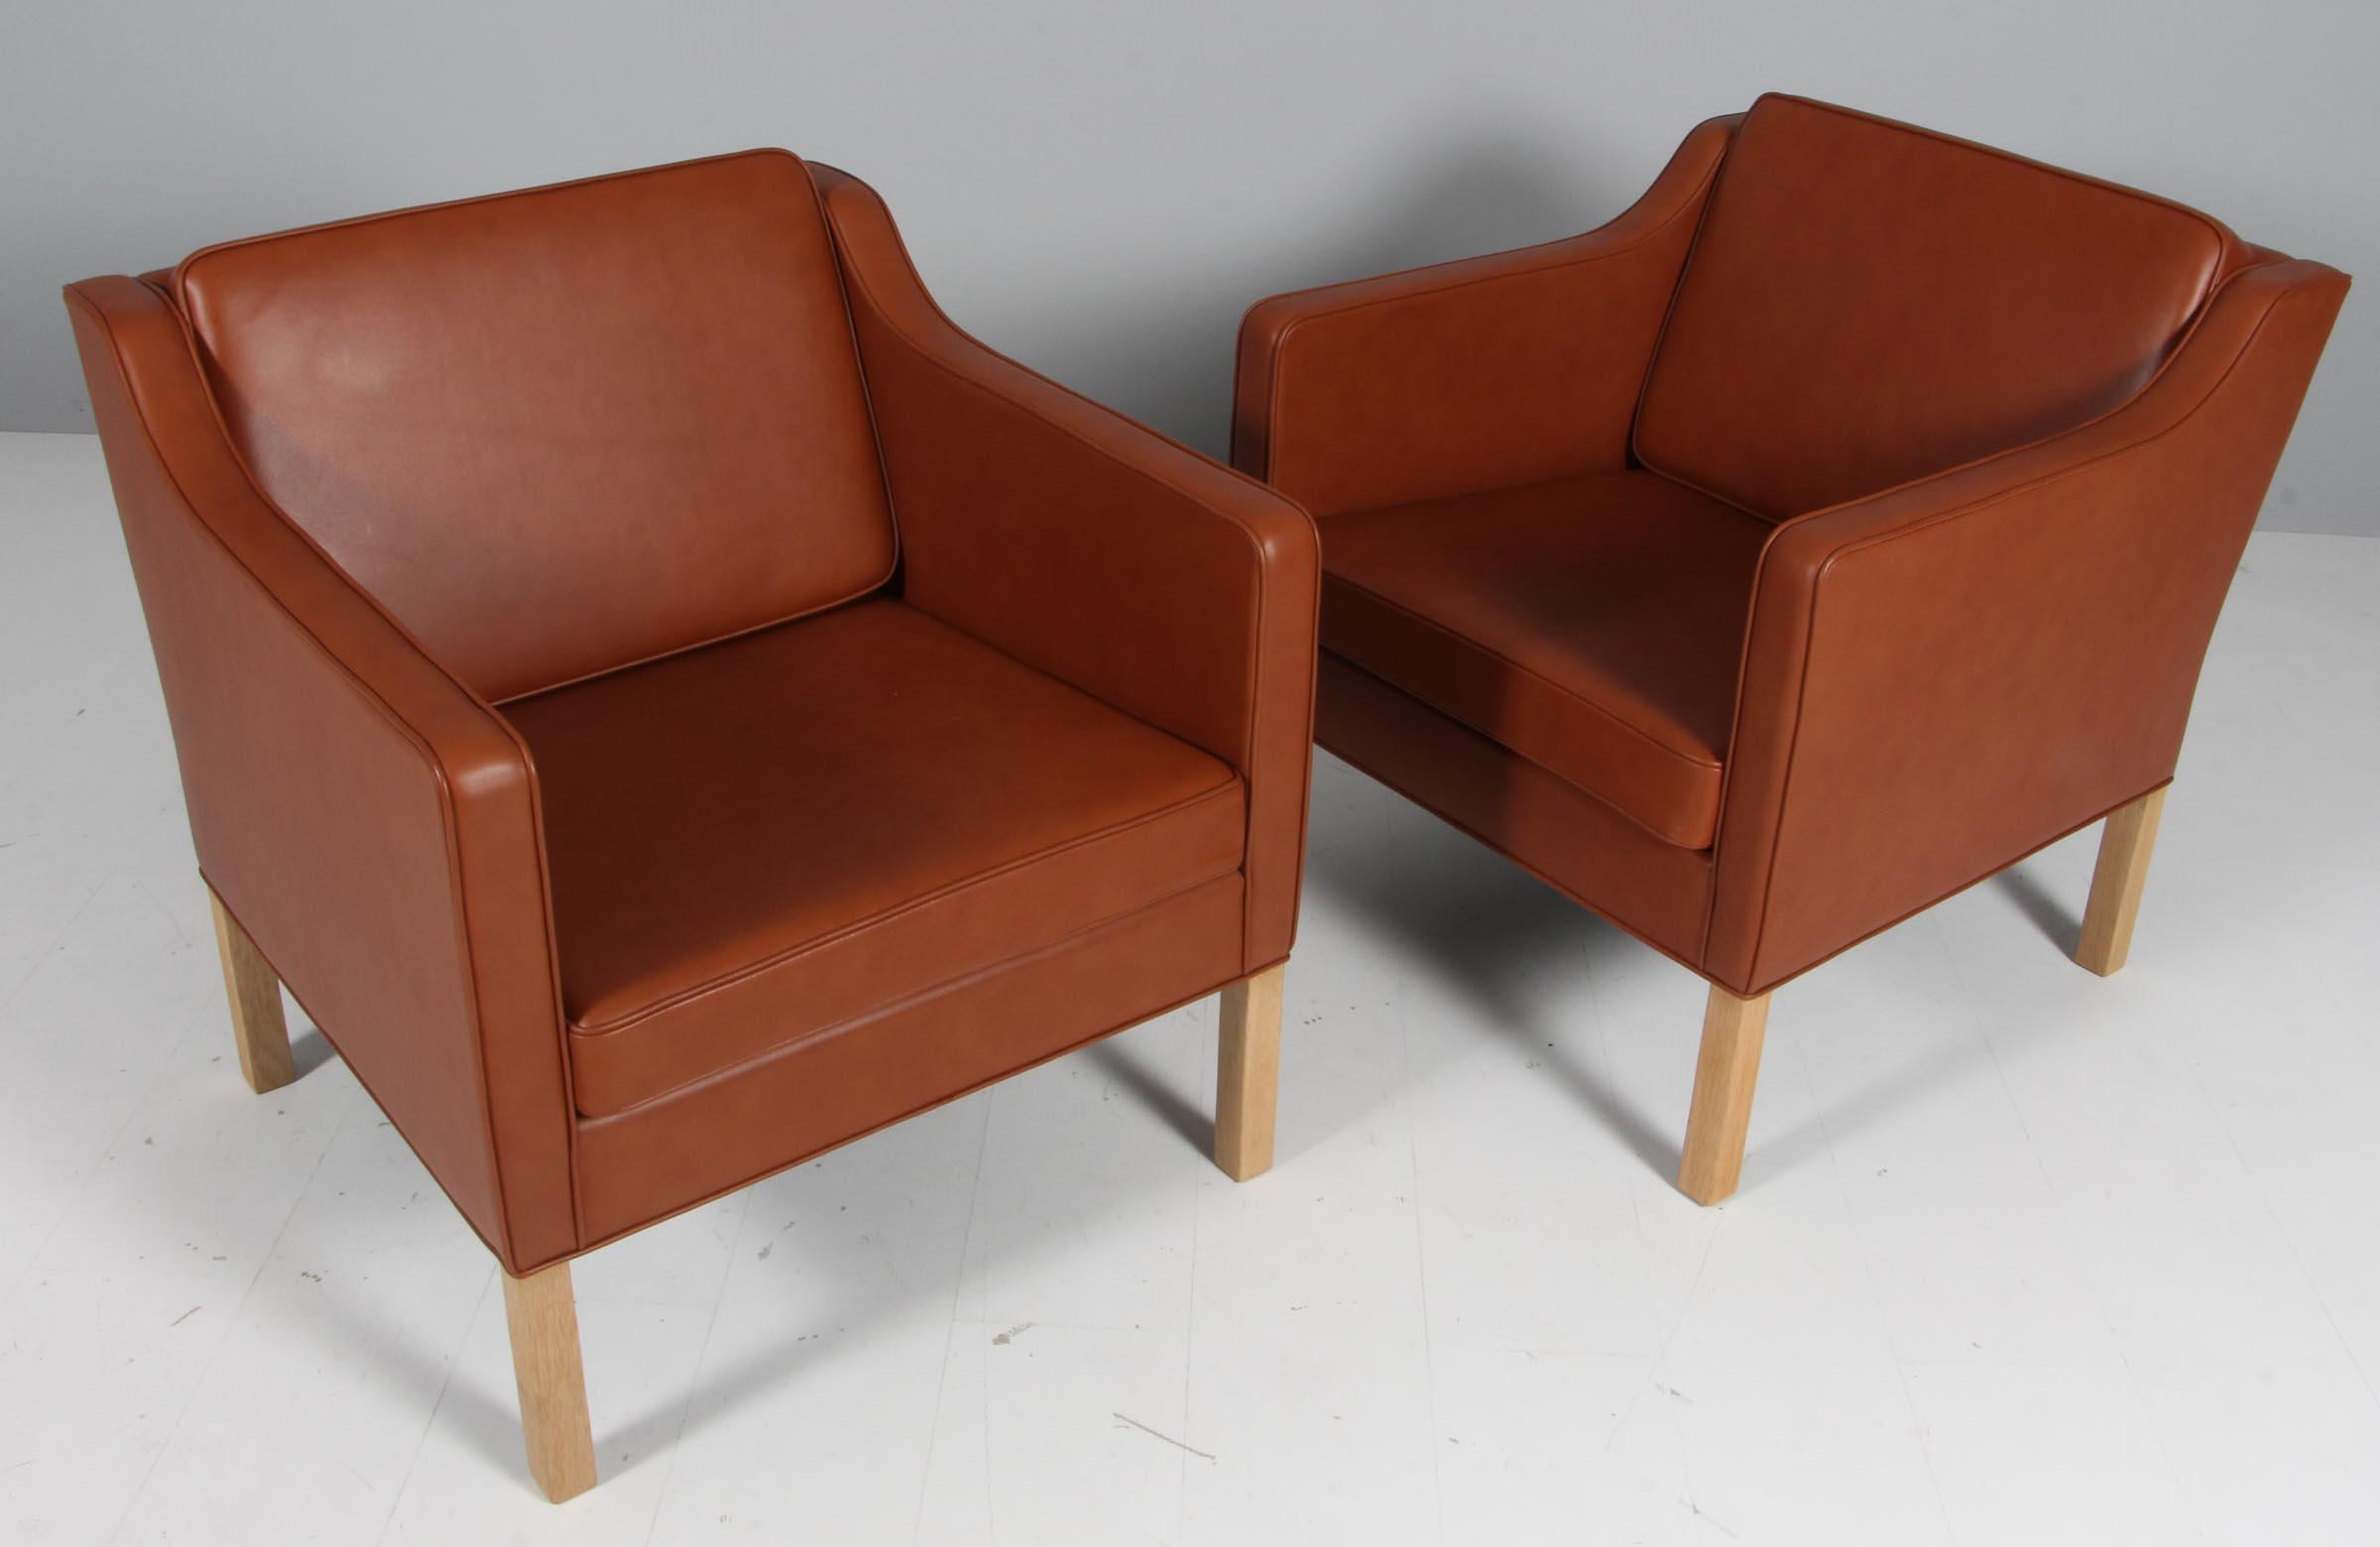 Børge Mogensen lounge chair new upholstered with cognac pure full grain aniline leather.

Legs of oak.

Model 2321, made by Fredericia Furniture.